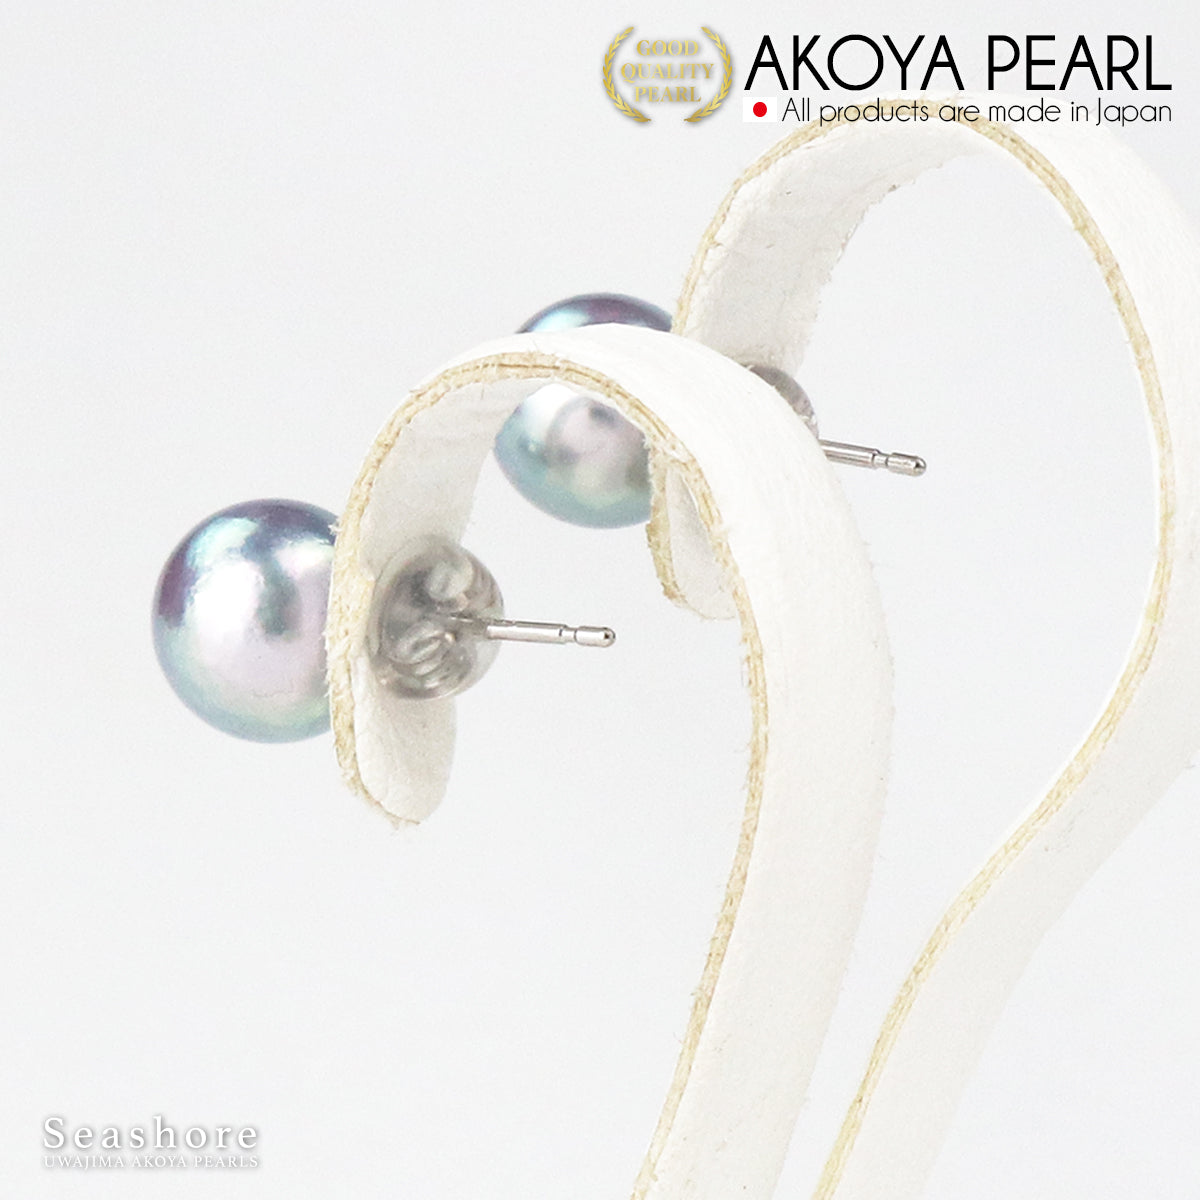 Pearl Hook Earrings Women's Baroque Natural Blue [8.0-8.5mm] Free Gift Included SV925 Akoya Akoya Pearl Accessories Simple Seashore Seashore
 Comes with a gray case for storage [Free shipping]